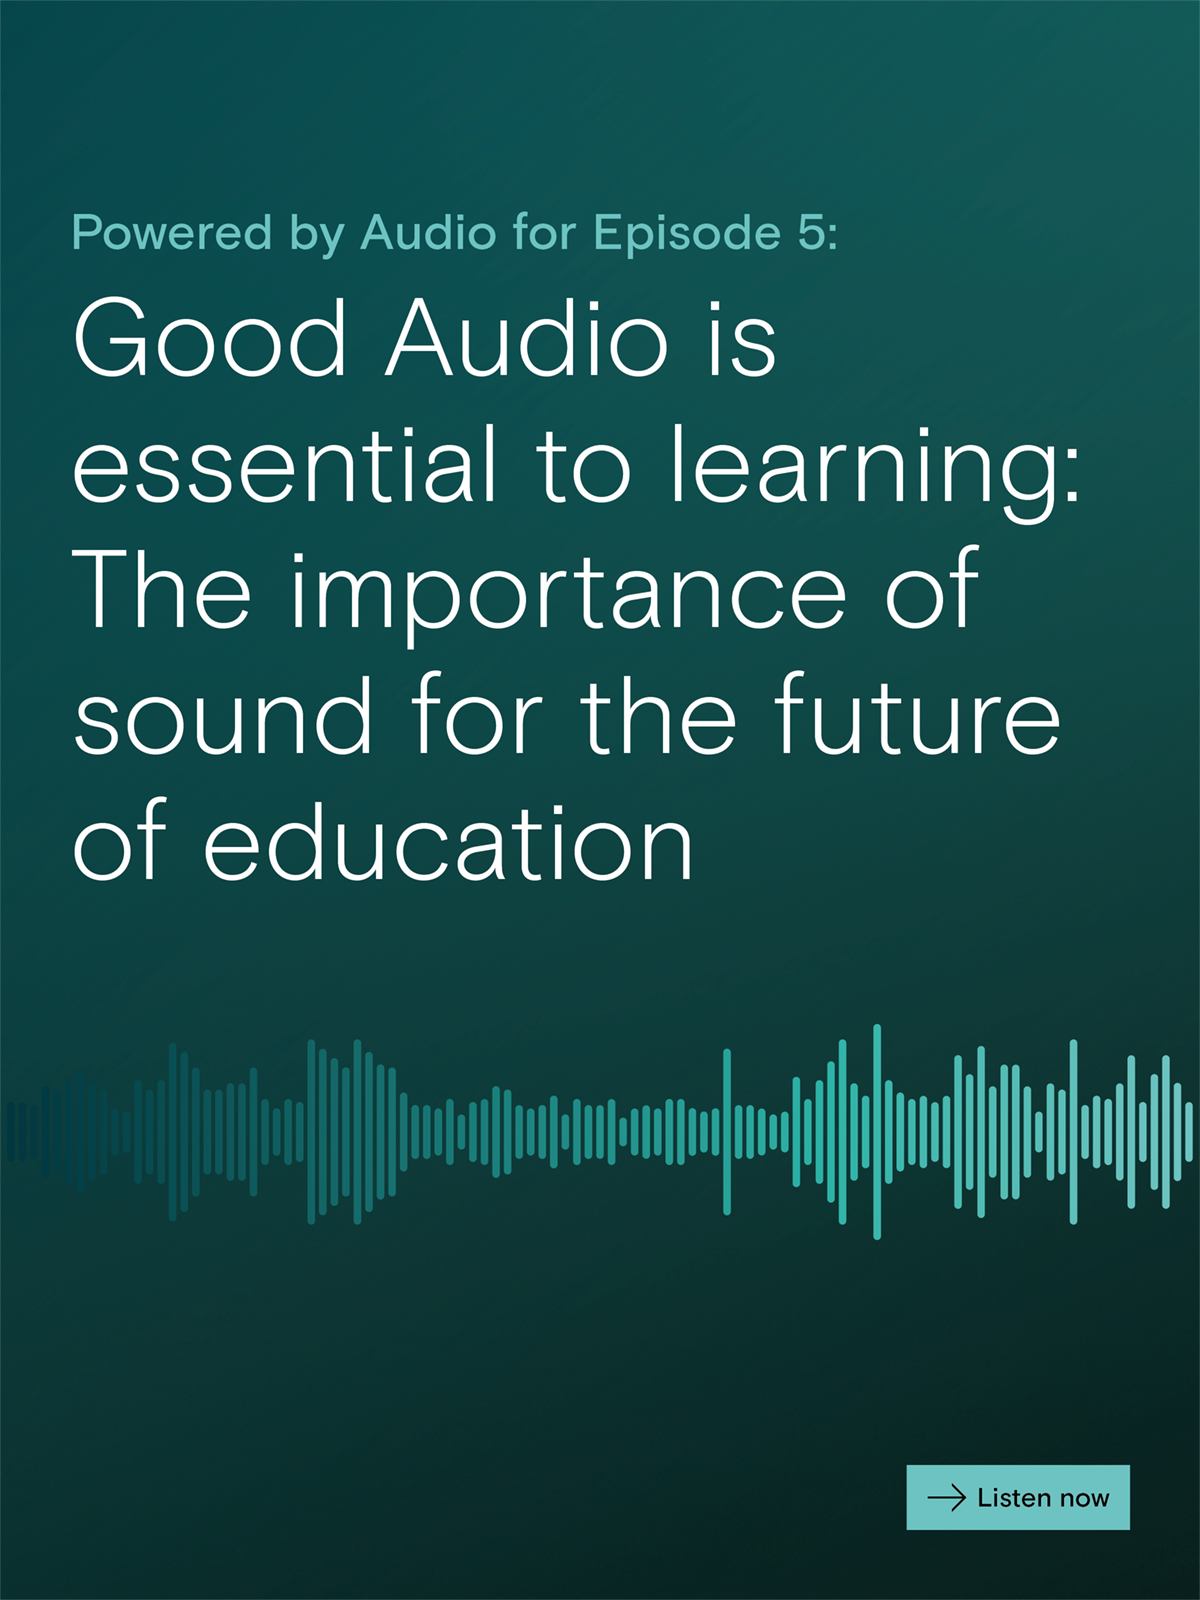 Headsets for education – flexible audio powered by EPOS